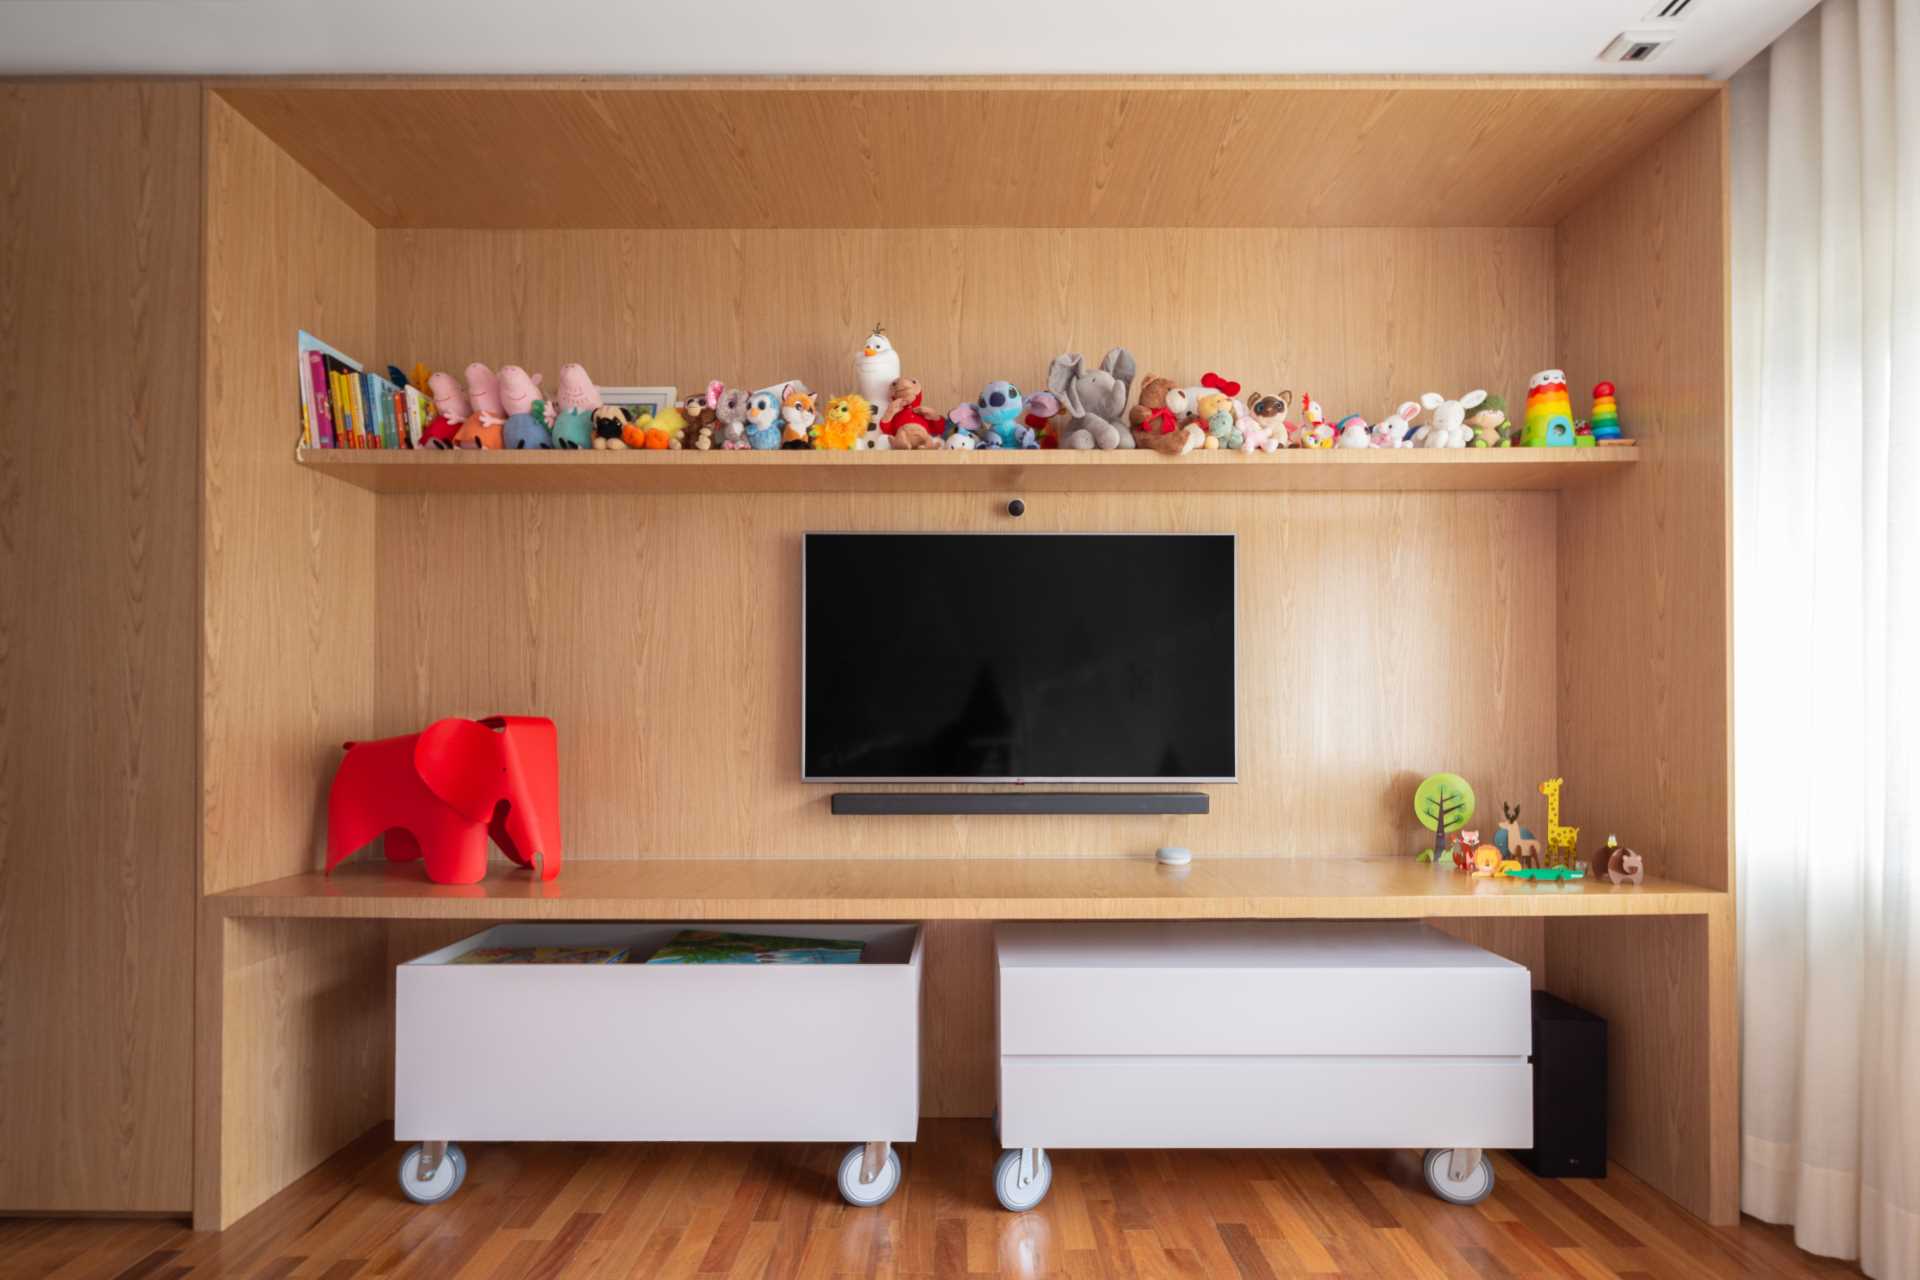 A wood accent wall in a kids bedroom has a shelf for toys, and storage bins on wheels underneath.